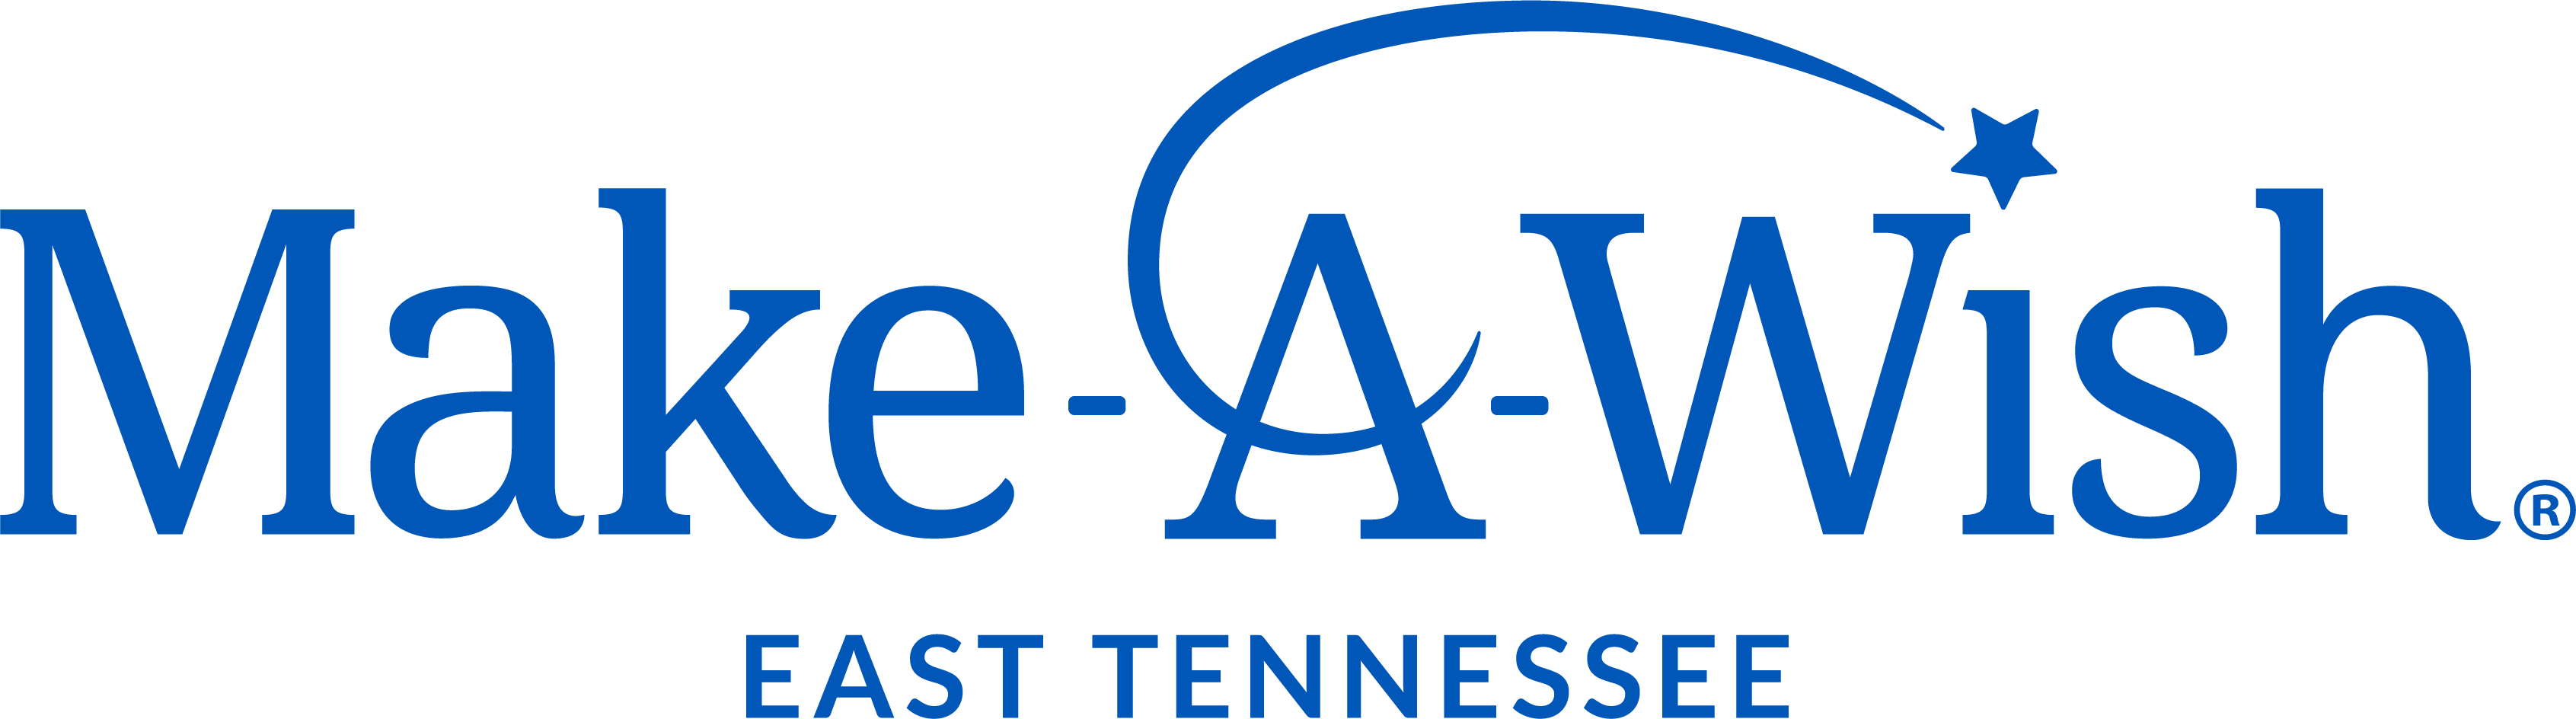 Benefiting Make-A-Wish East Tennessee